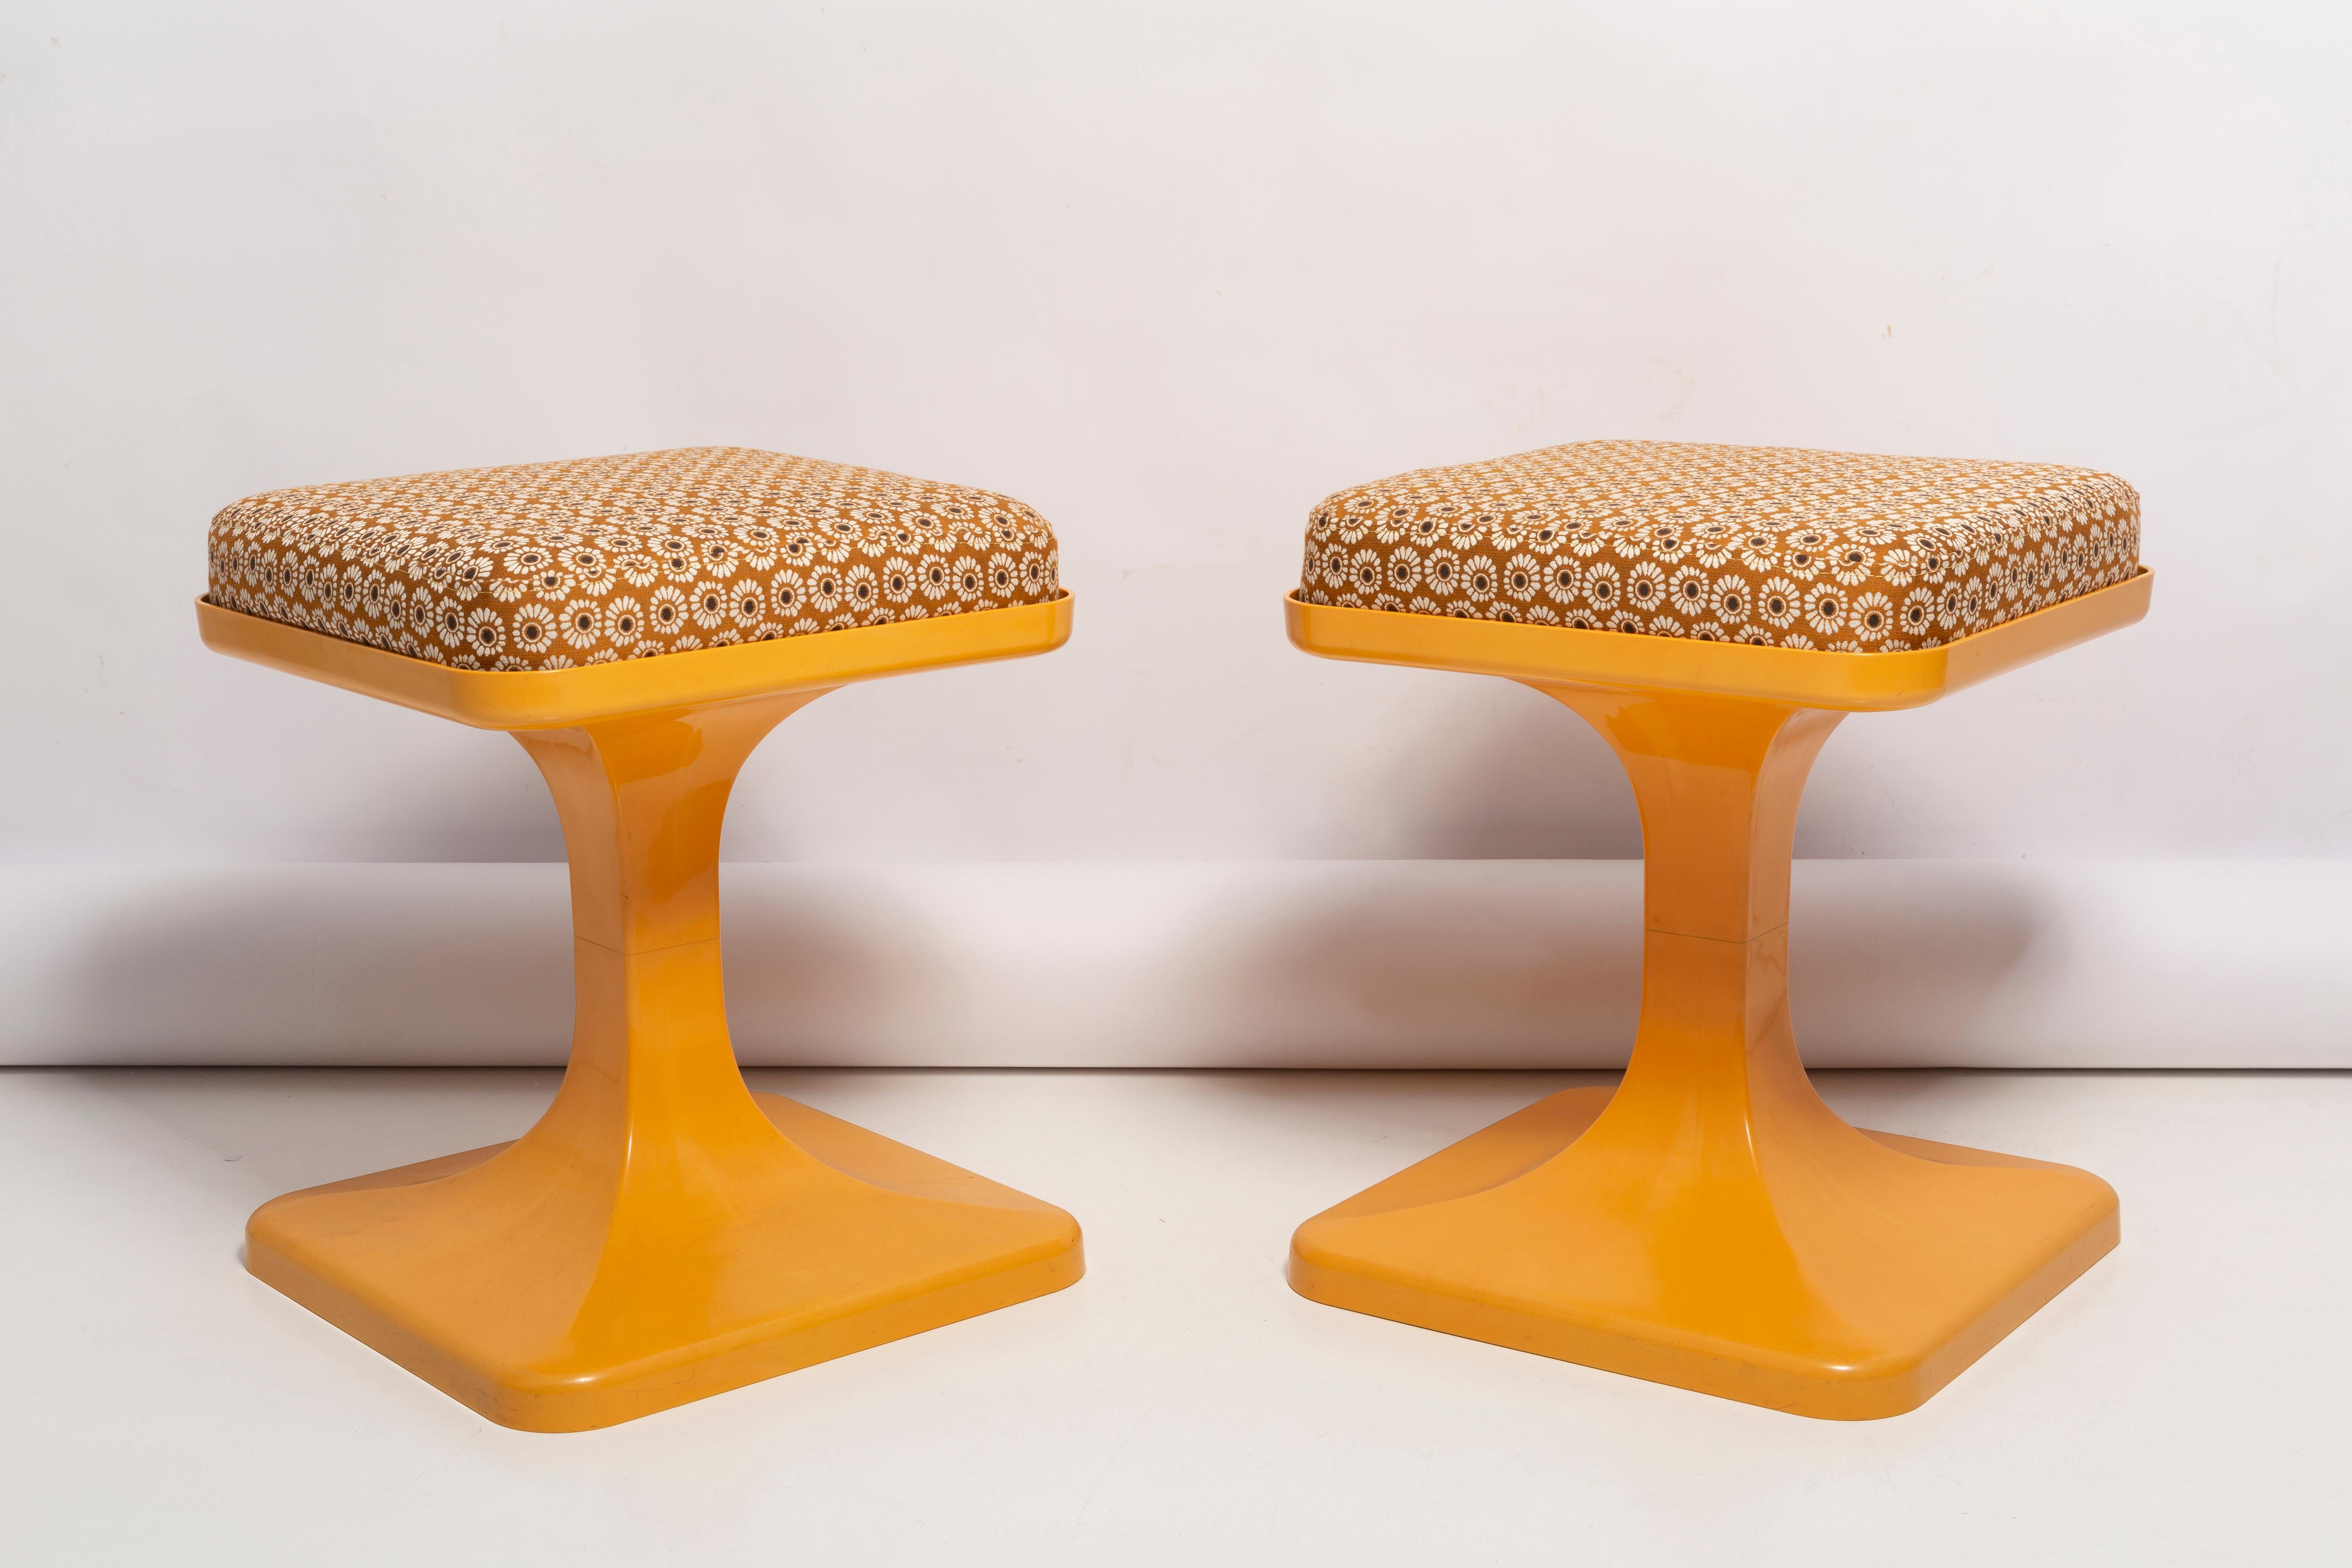 Space Age style plastic stools were made in Poland by Krynwald ERG fabric around the 1960s-1970s. The futuristic shape is tapered and aerodynamic, with a tulip foot and an yellow mustard color. This original piece in hard plastic imitates the